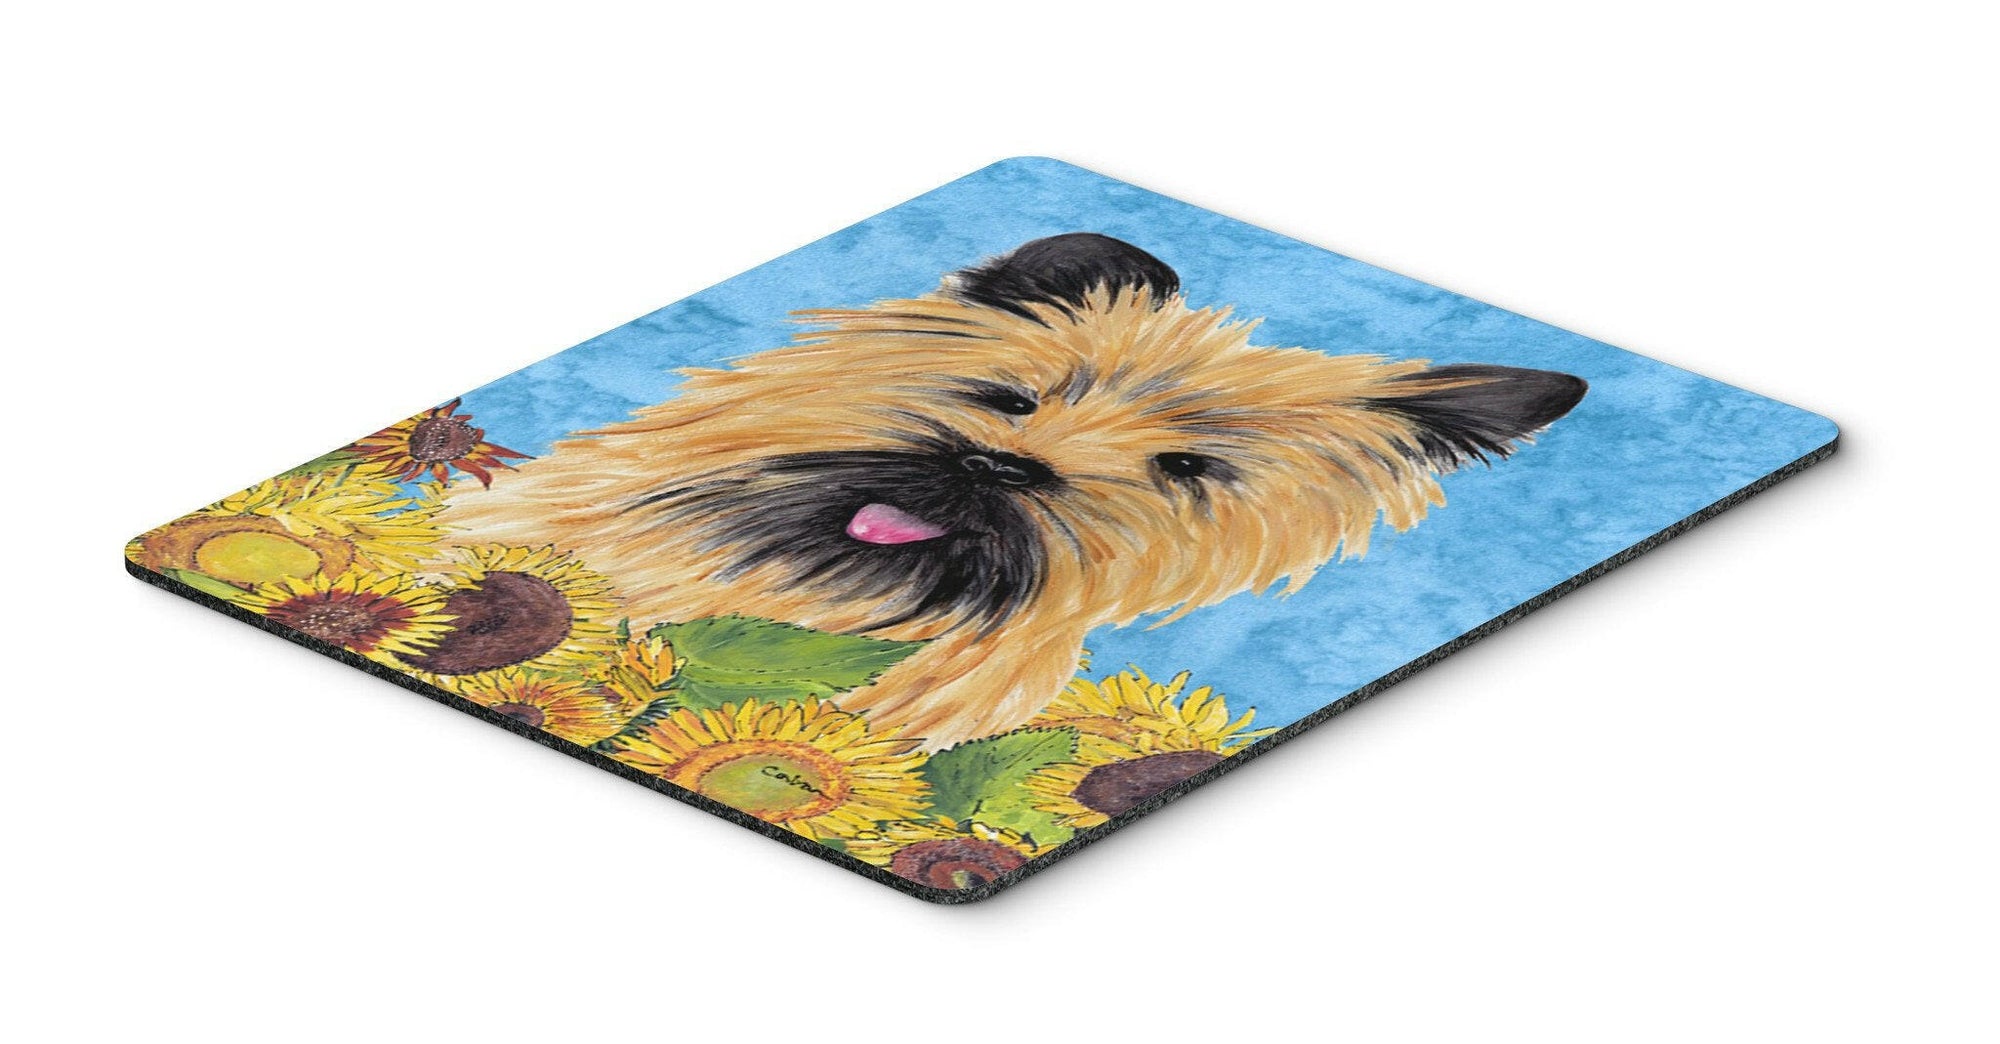 Cairn Terrier Mouse Pad, Hot Pad or Trivet by Caroline's Treasures